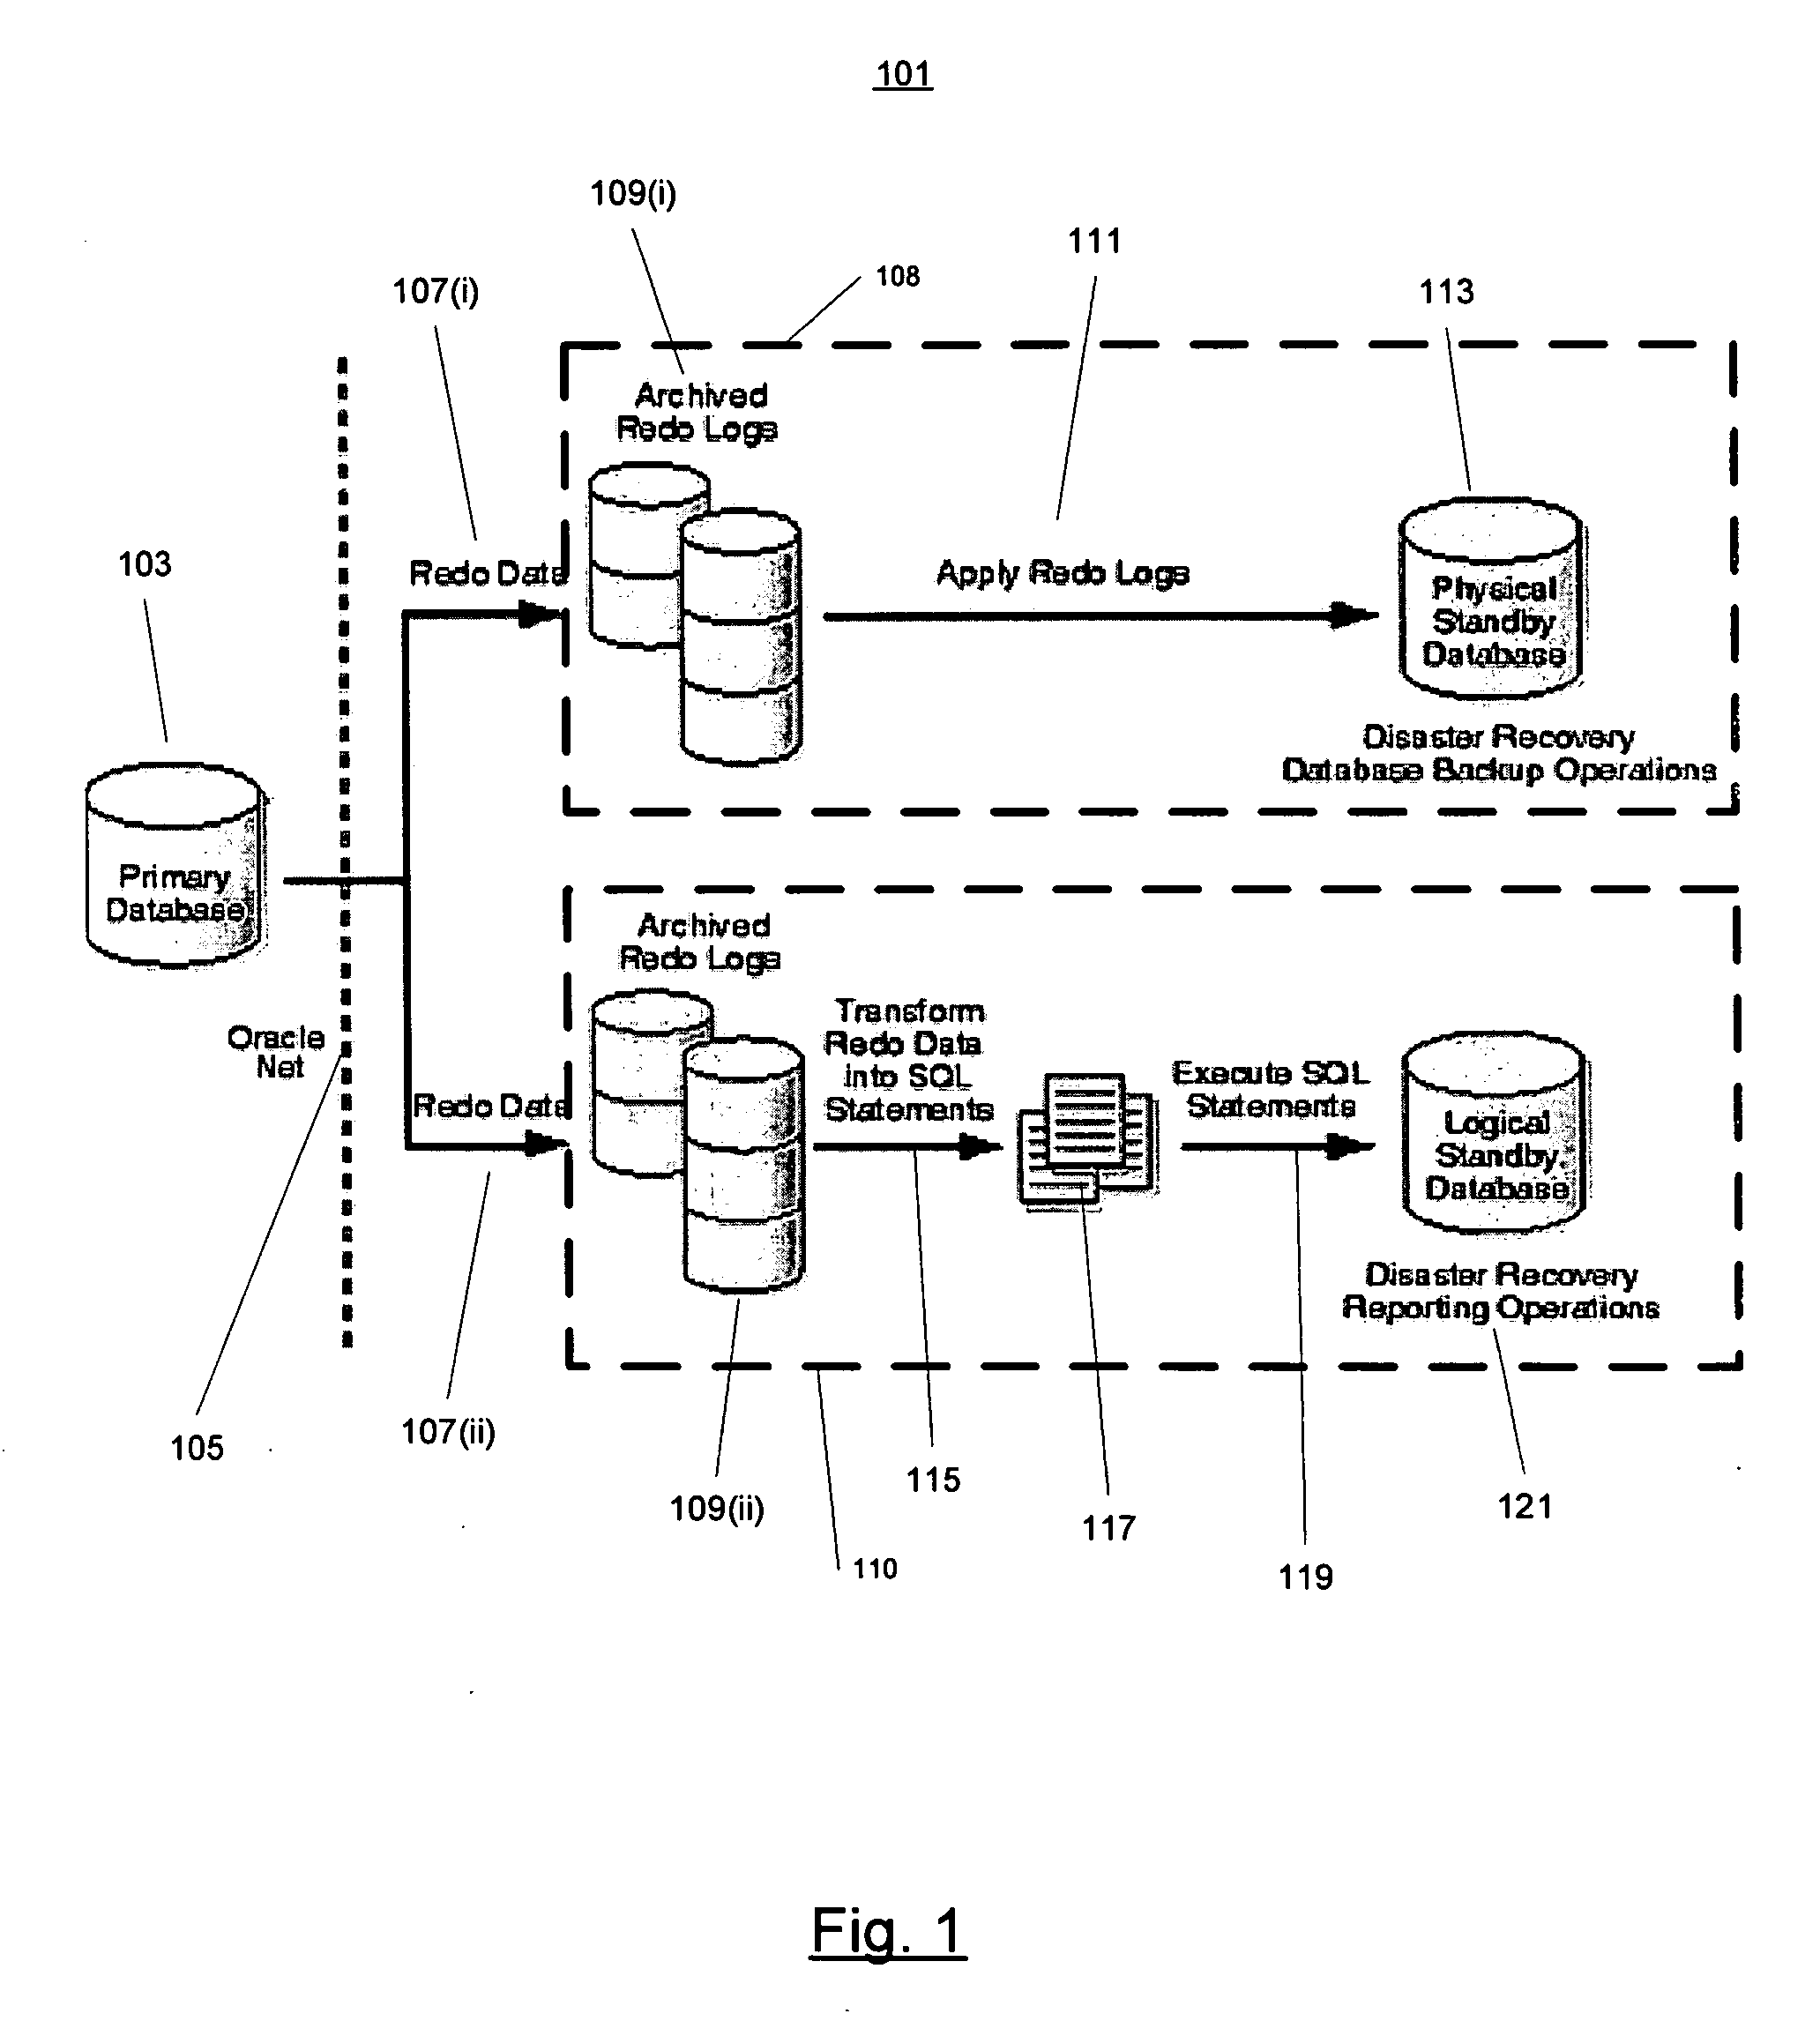 System and method of configuring a database system with replicated data and automatic failover and recovery